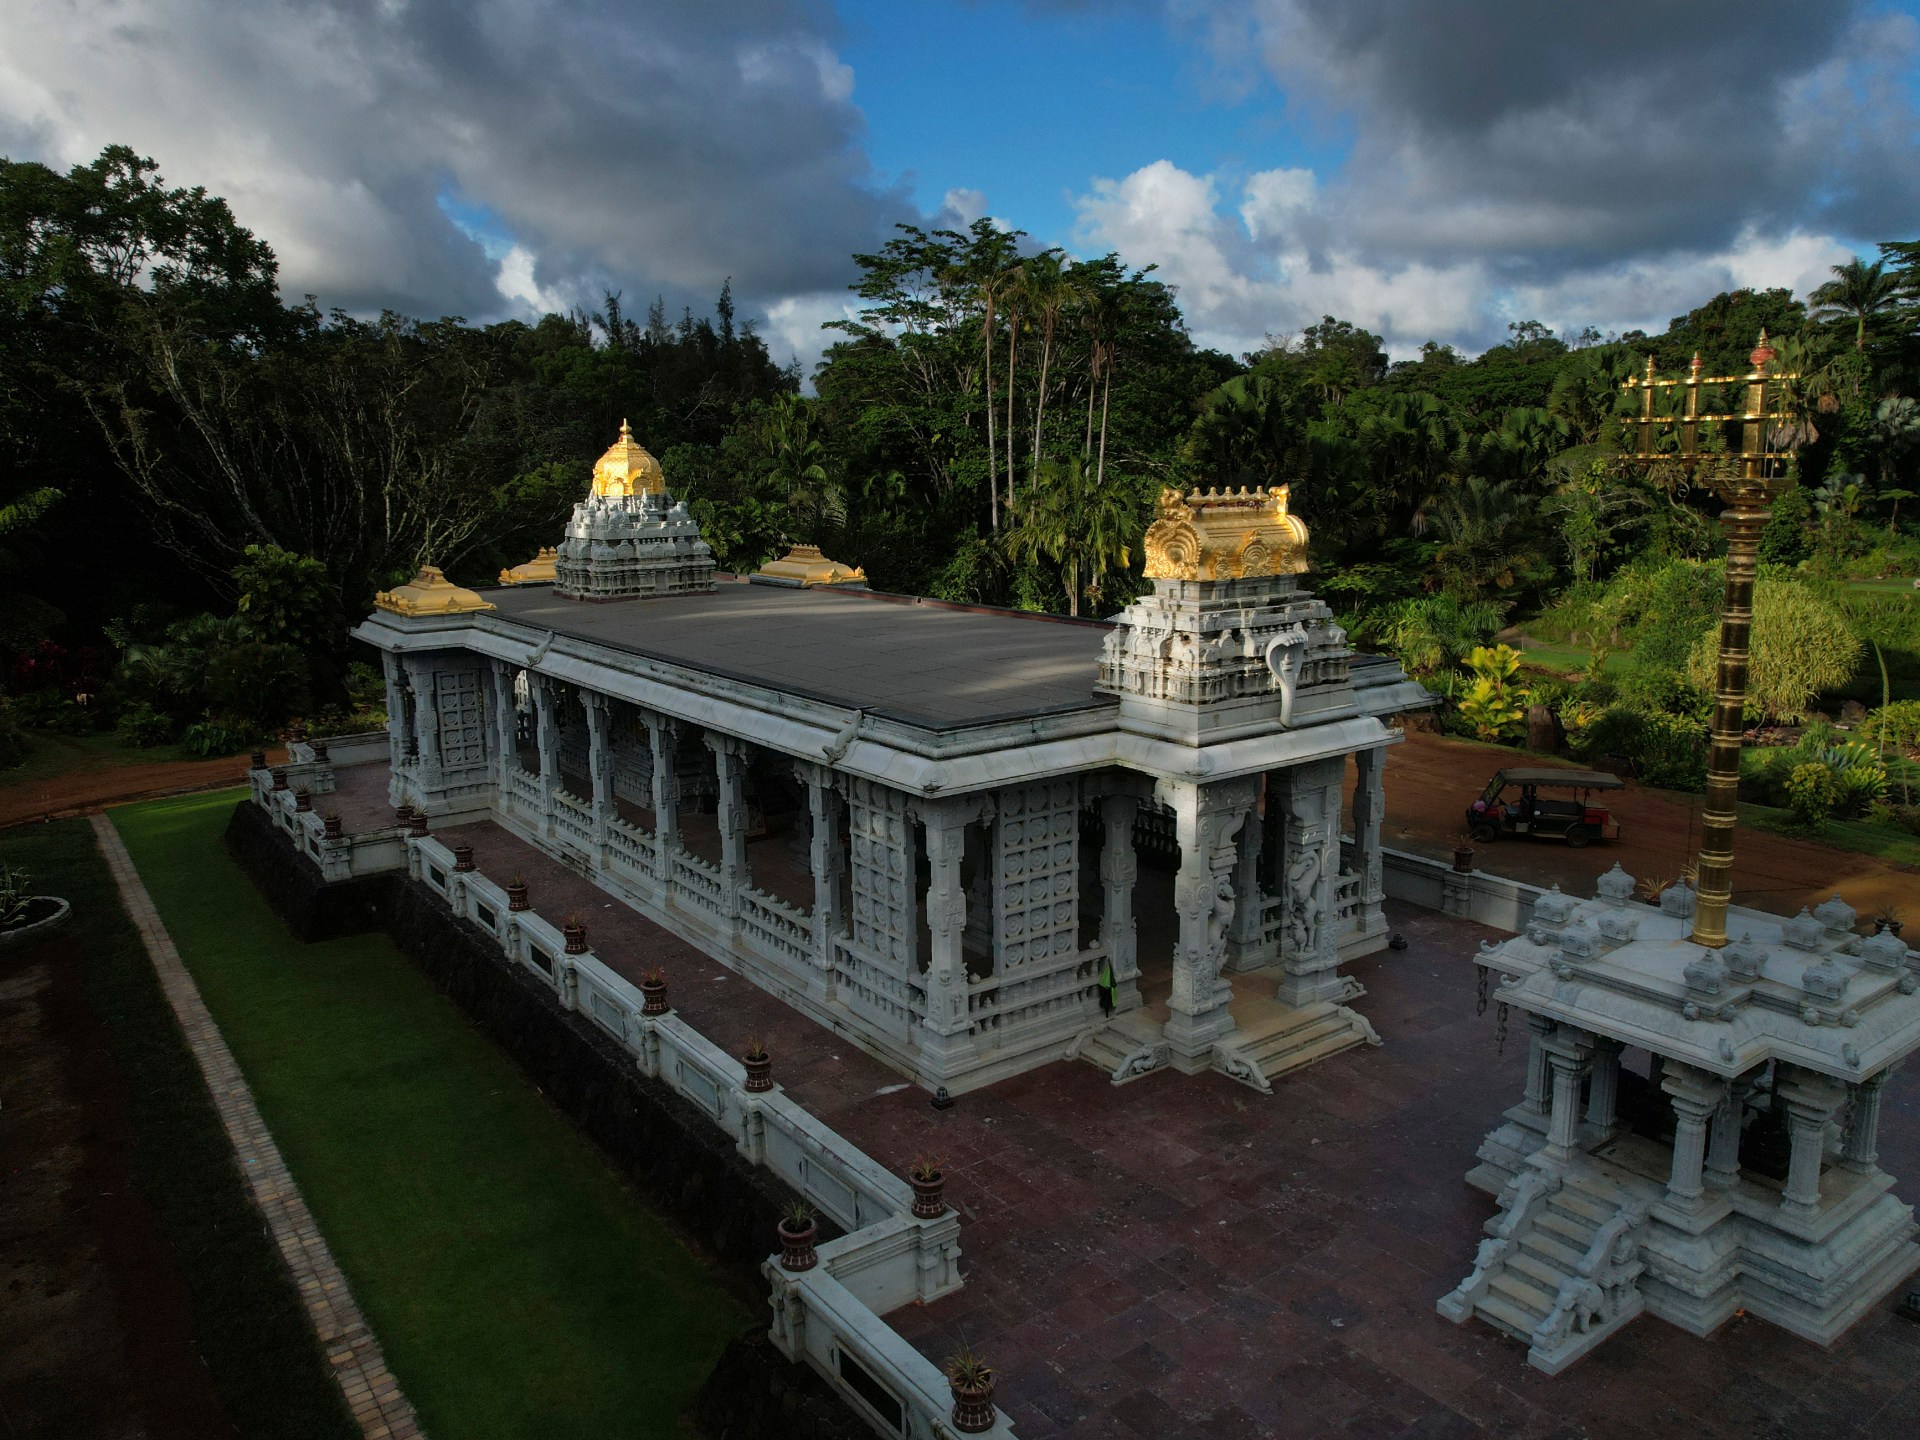 Photos: An all-granite, hand-carved Hindu temple in Hawaii